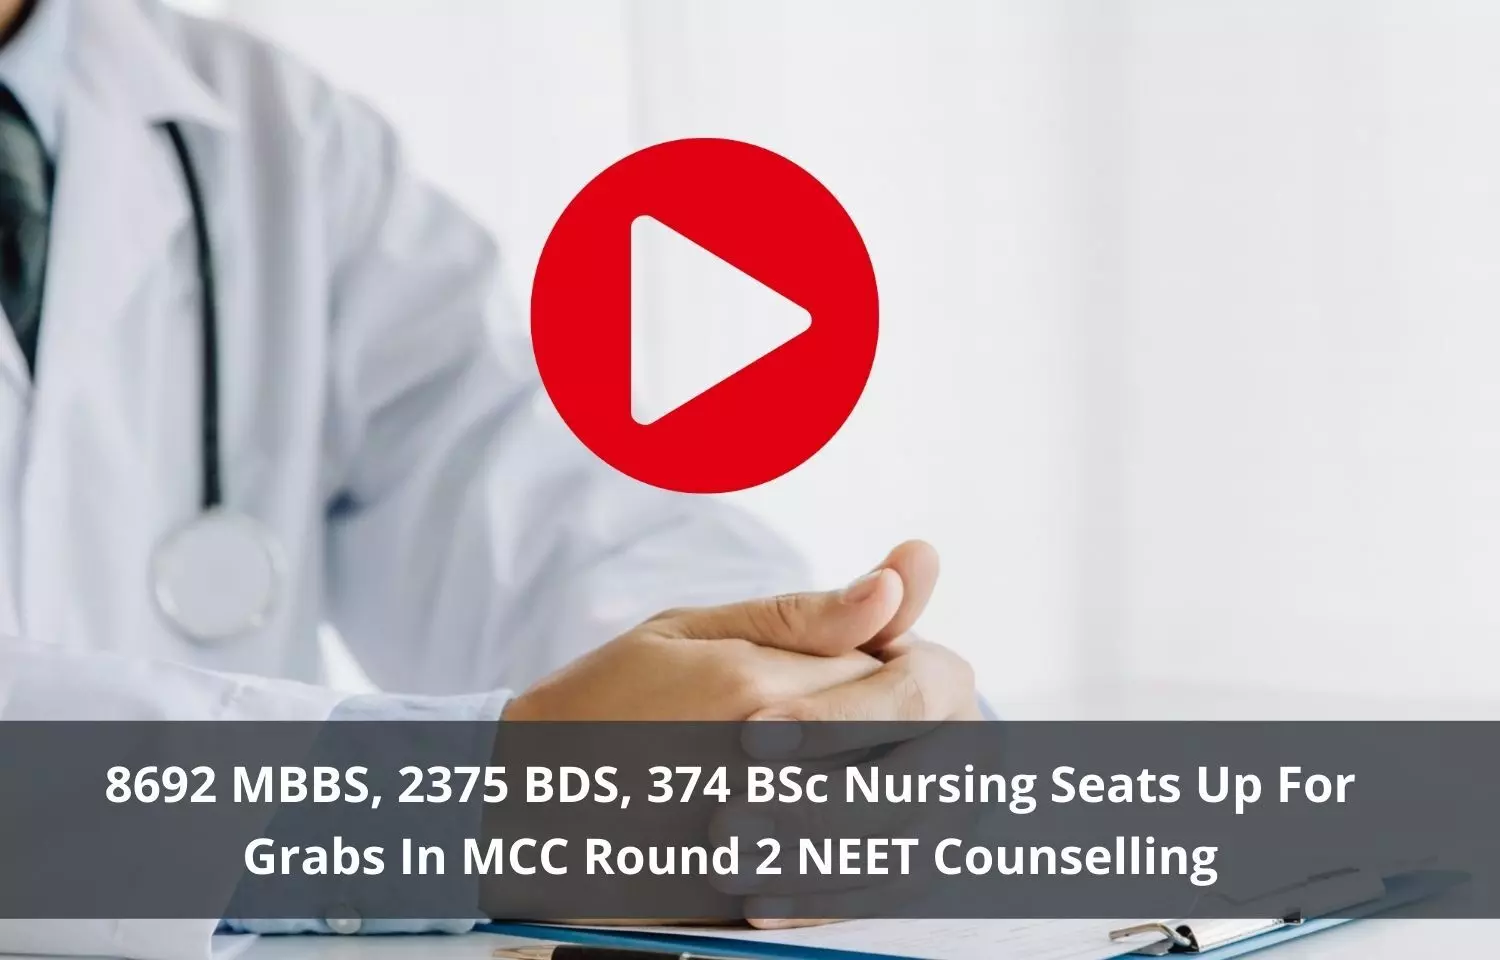 Round 2 NEET counselling: Check out details of vacant seats